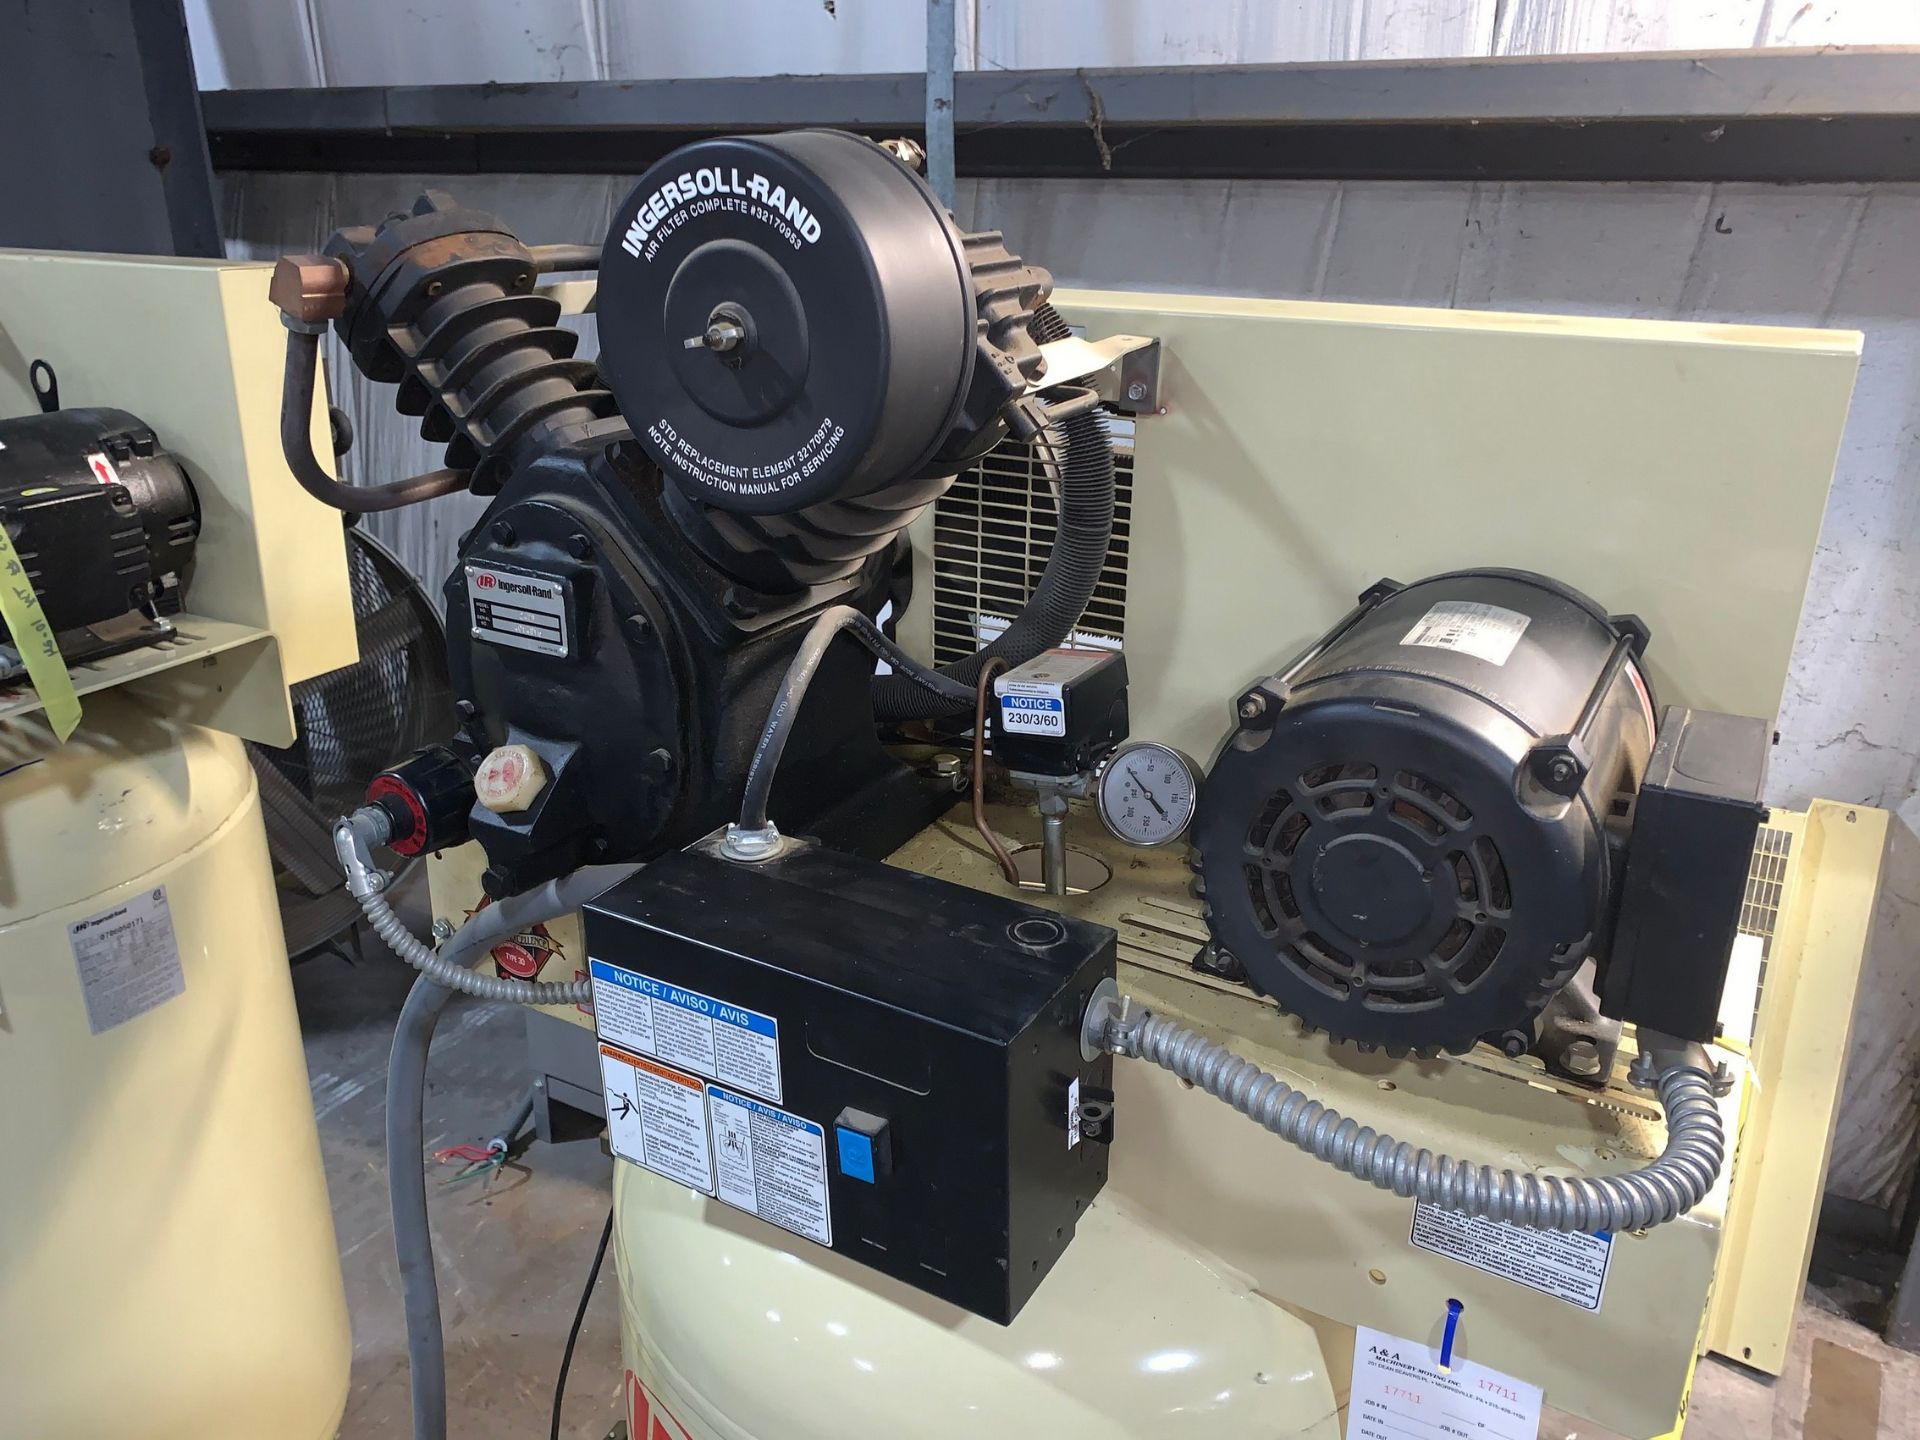 Ingersoll Rand 7.5Hp Reciprocating 2-Stage Air Compressor - Image 6 of 10